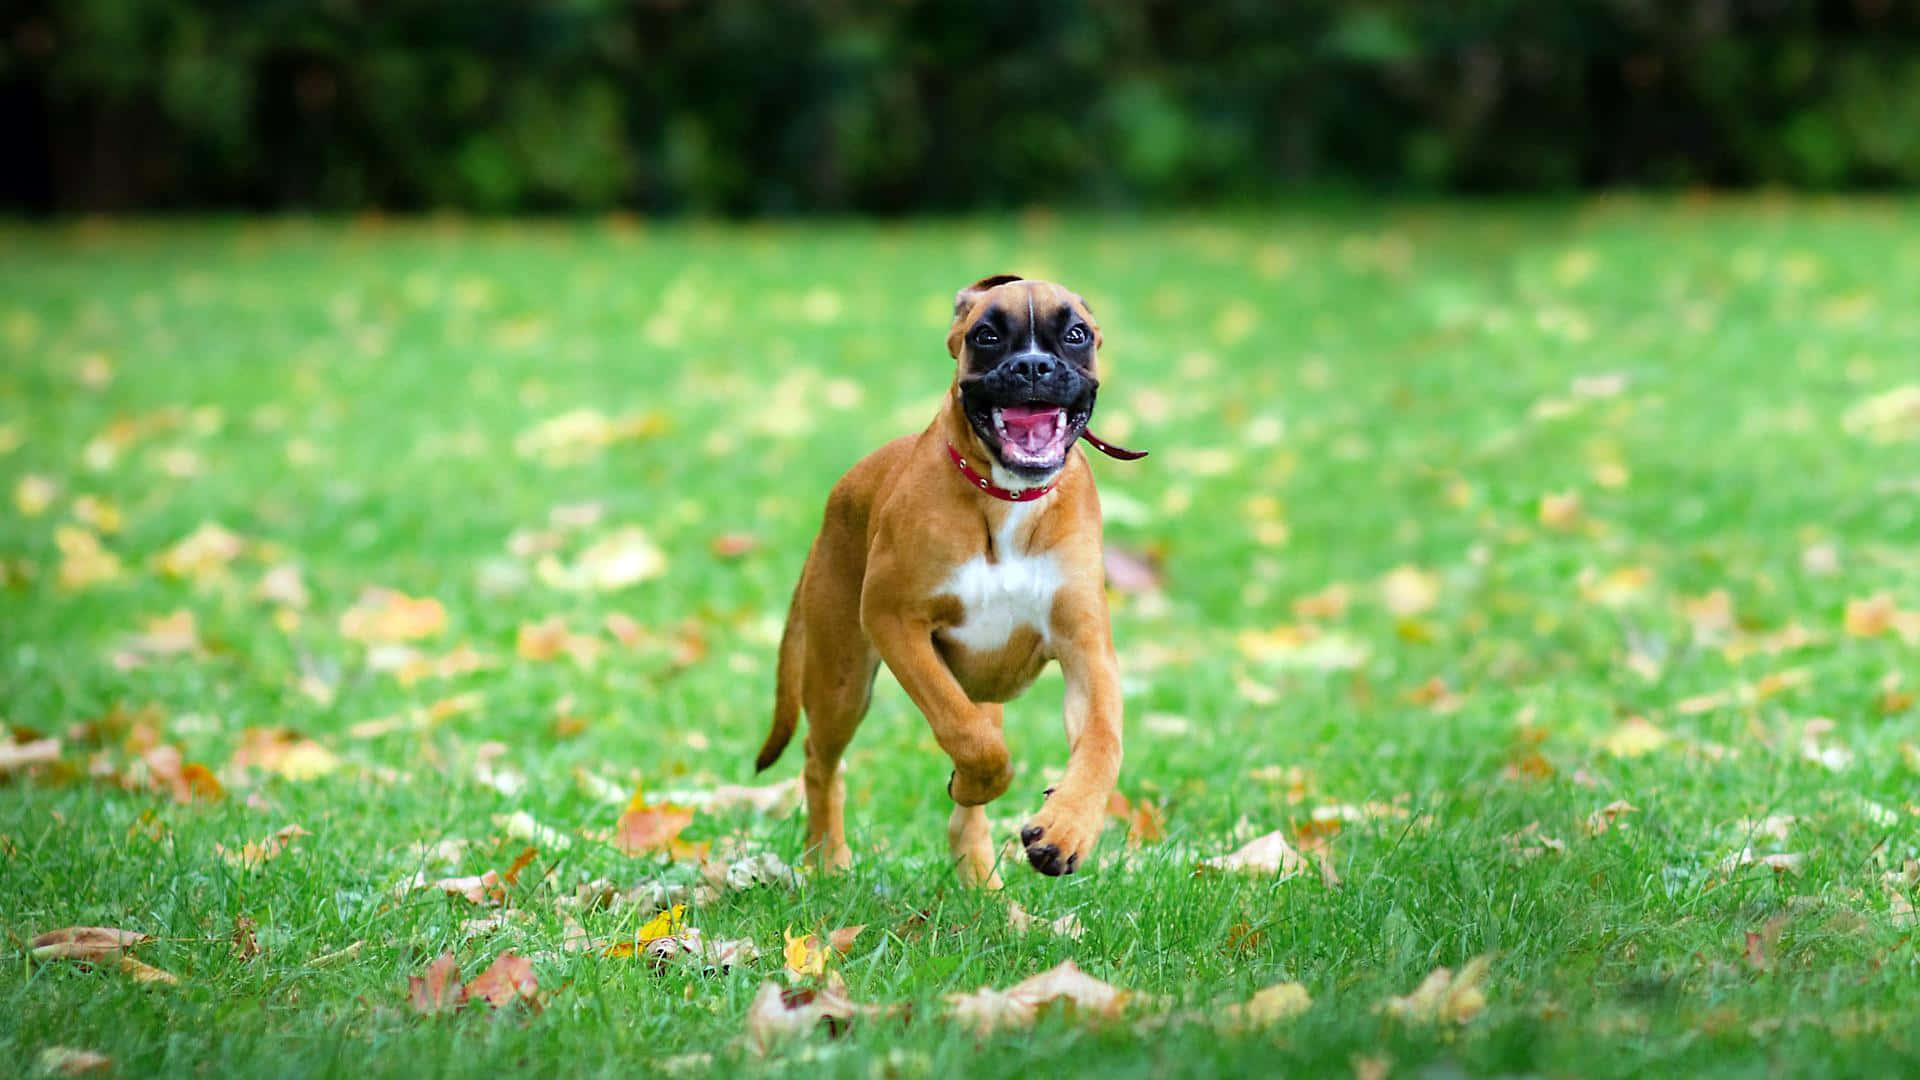 A Dog Running In The Grass With Its Mouth Open